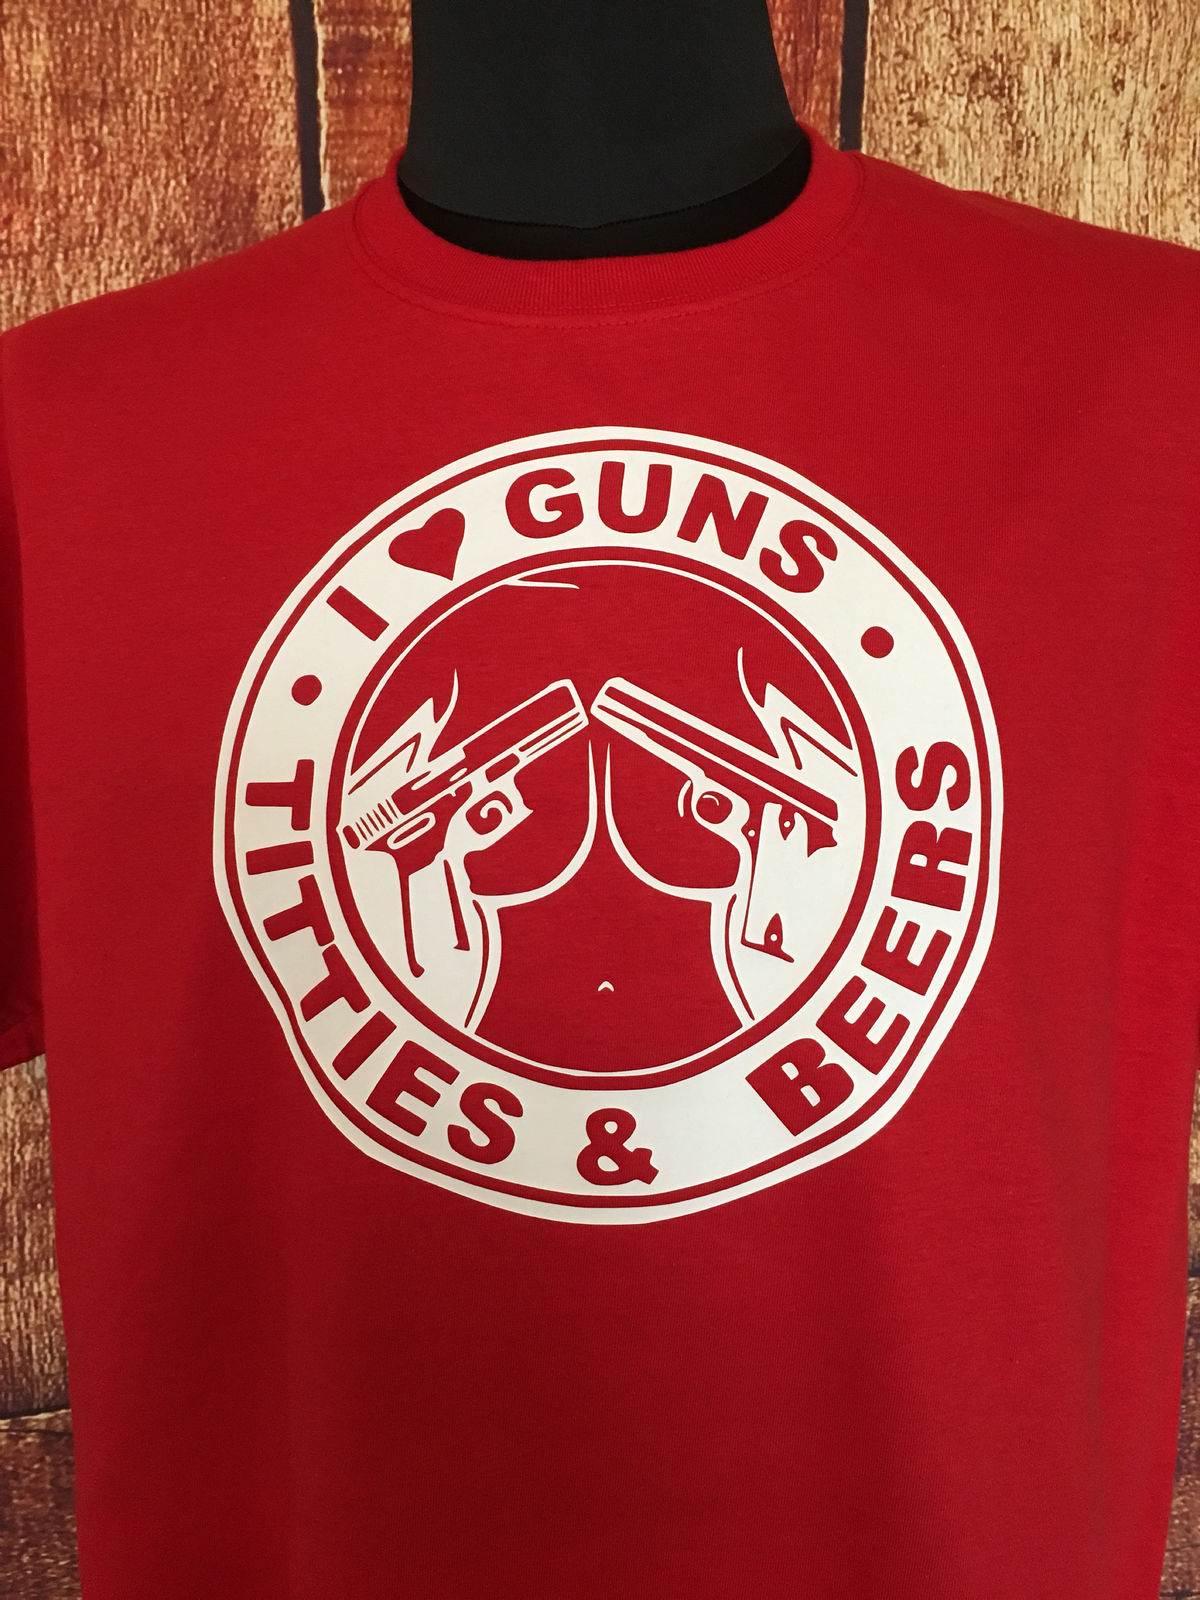 I love guns titties and beer t shirt, great gift for dad or